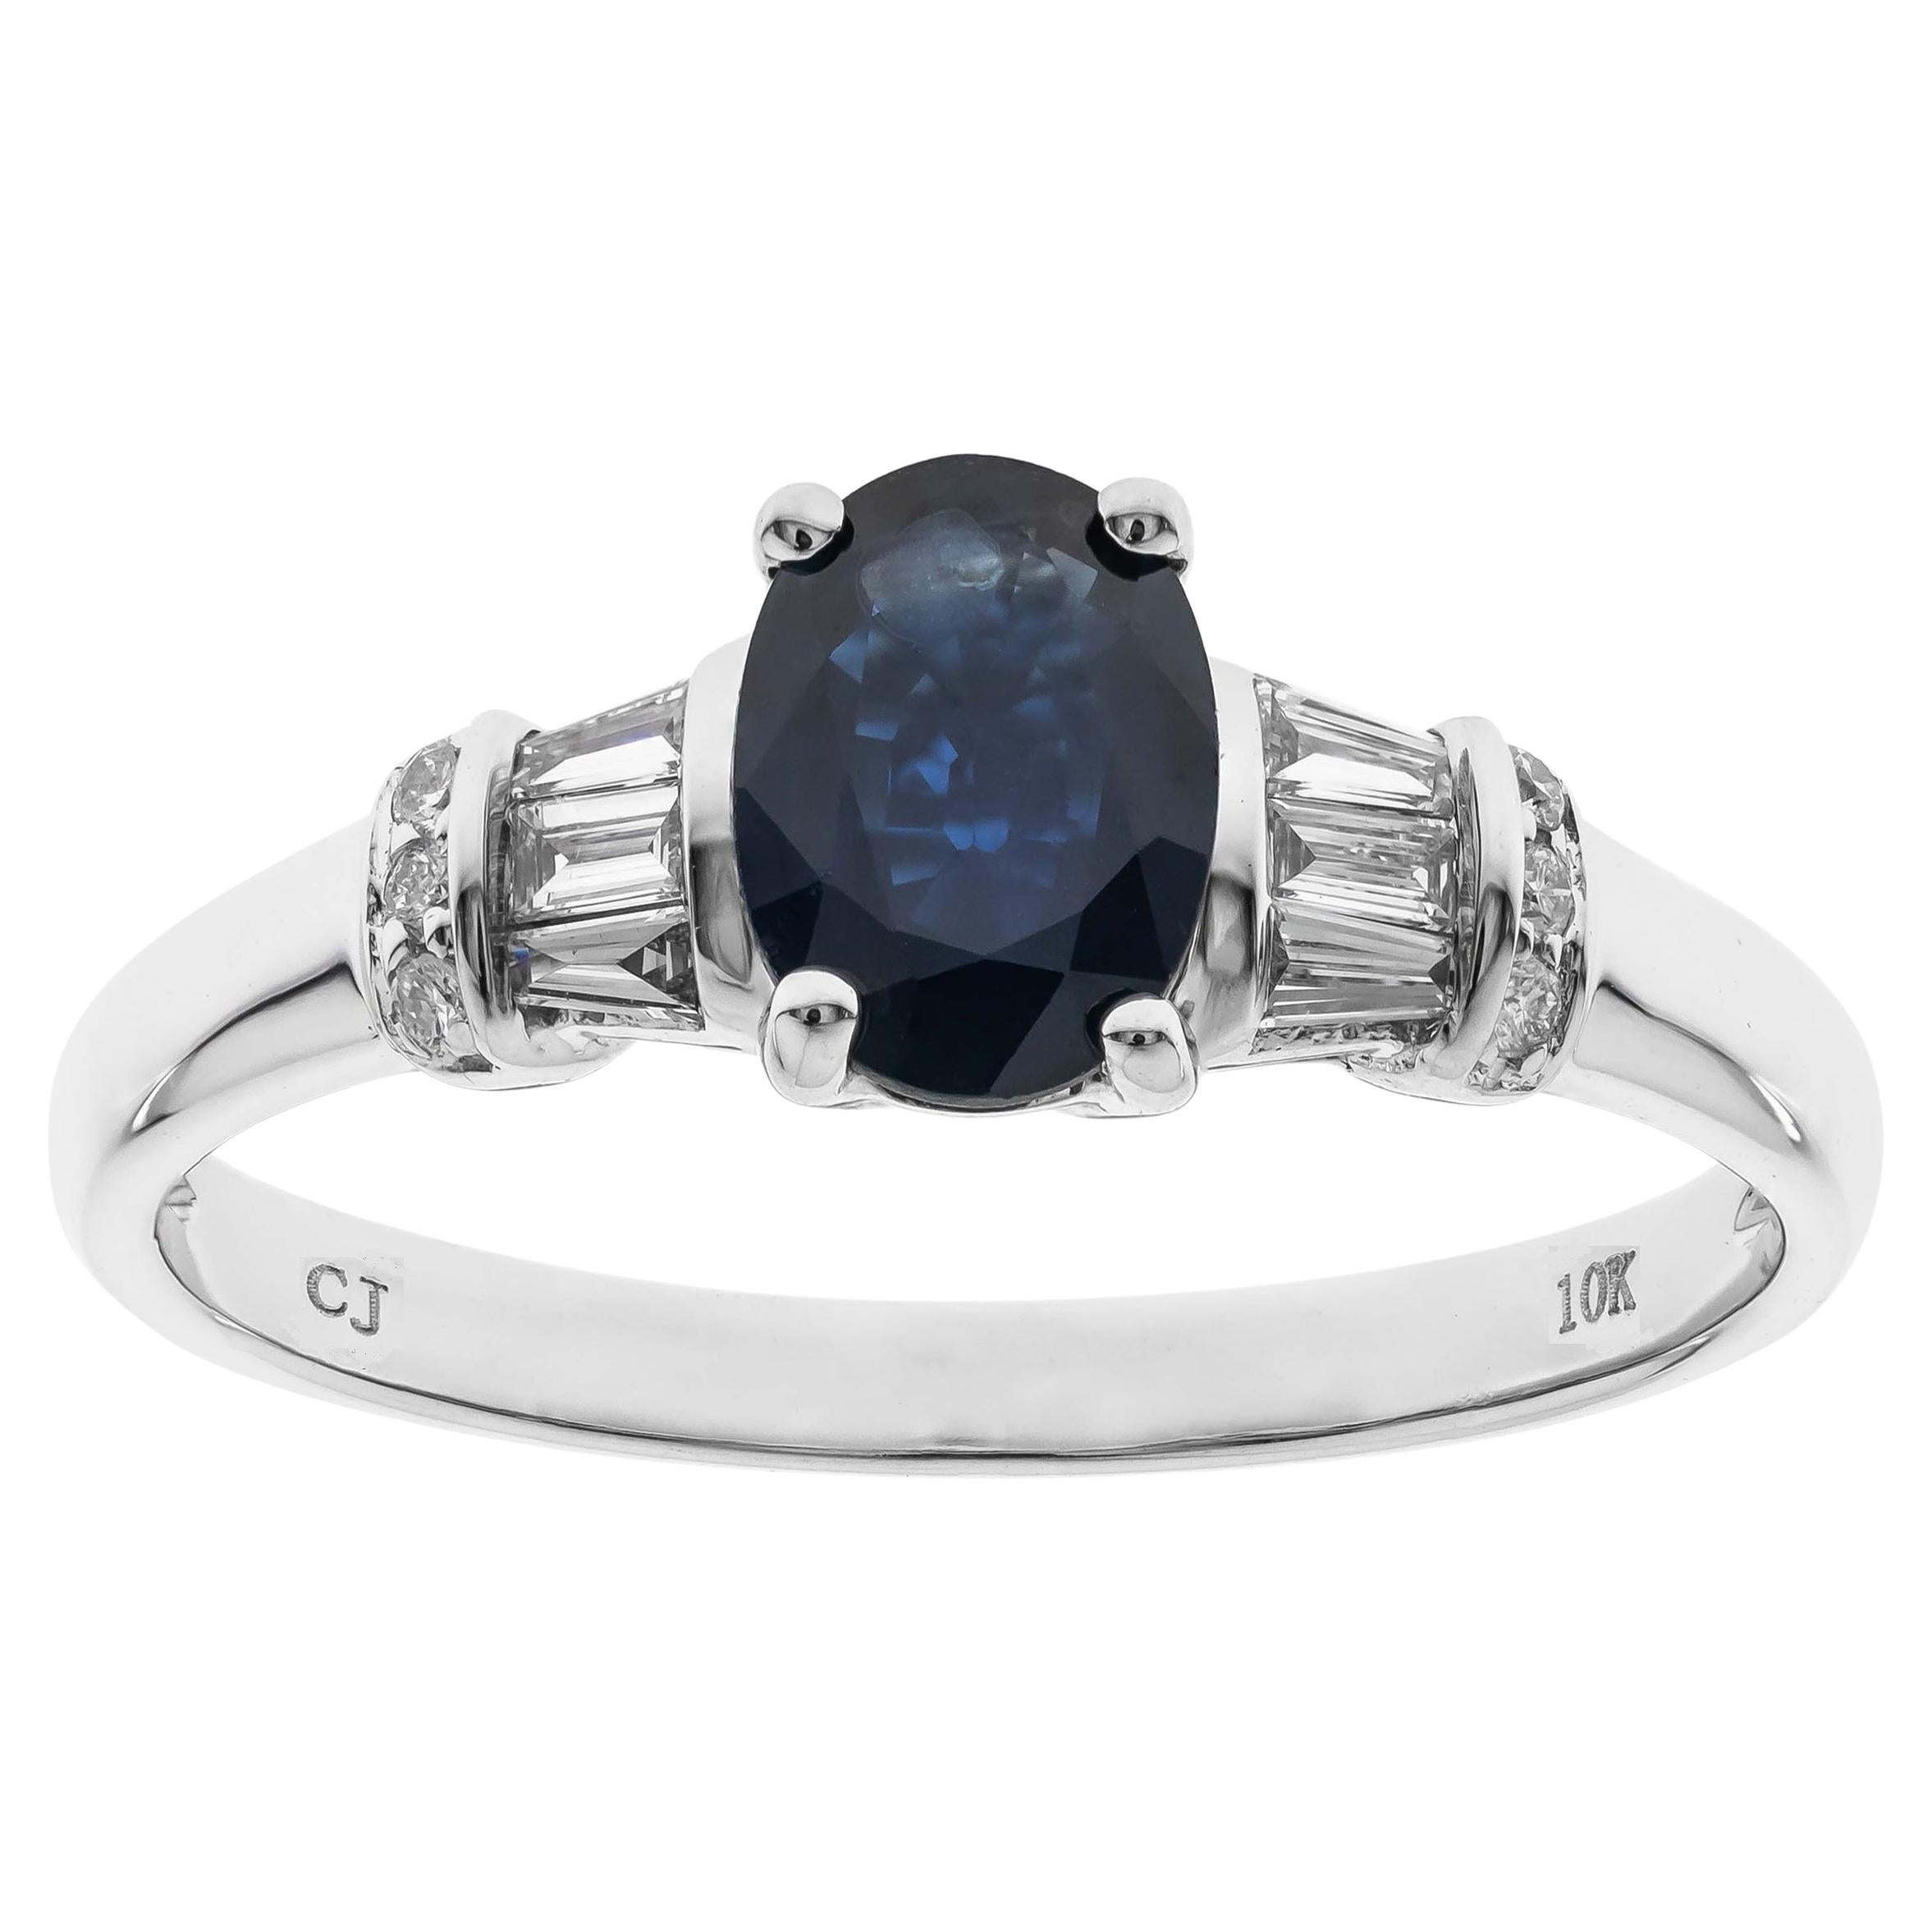 0.94 Carat Oval-Cut Blue Sapphire Diamond Accents 10K White Gold Ring For Sale